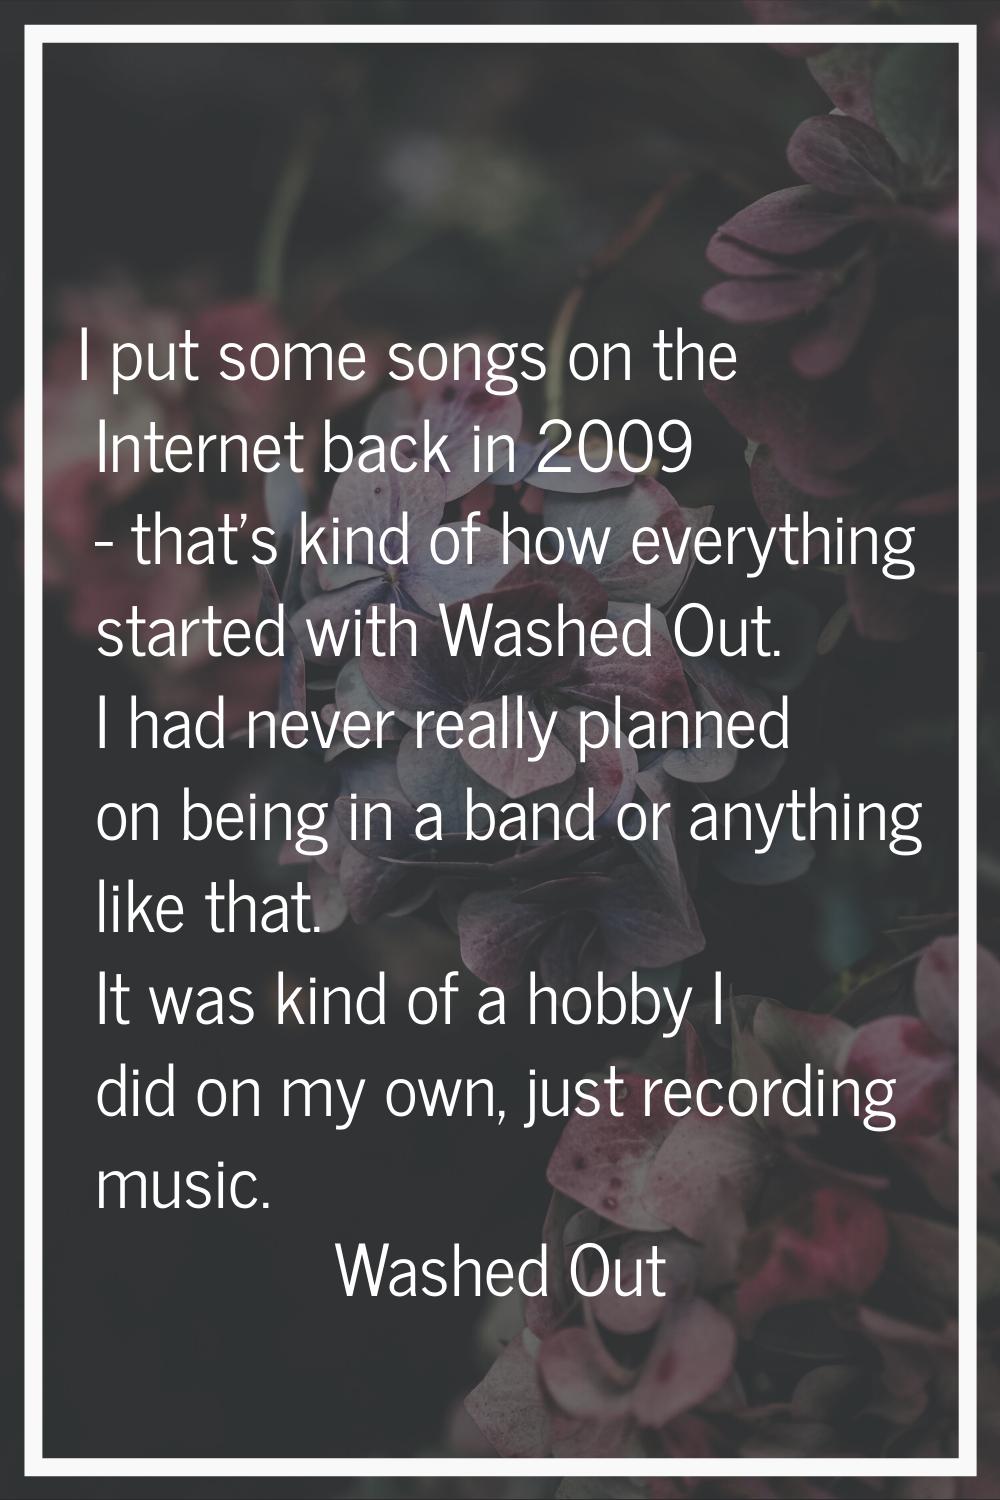 I put some songs on the Internet back in 2009 - that's kind of how everything started with Washed O